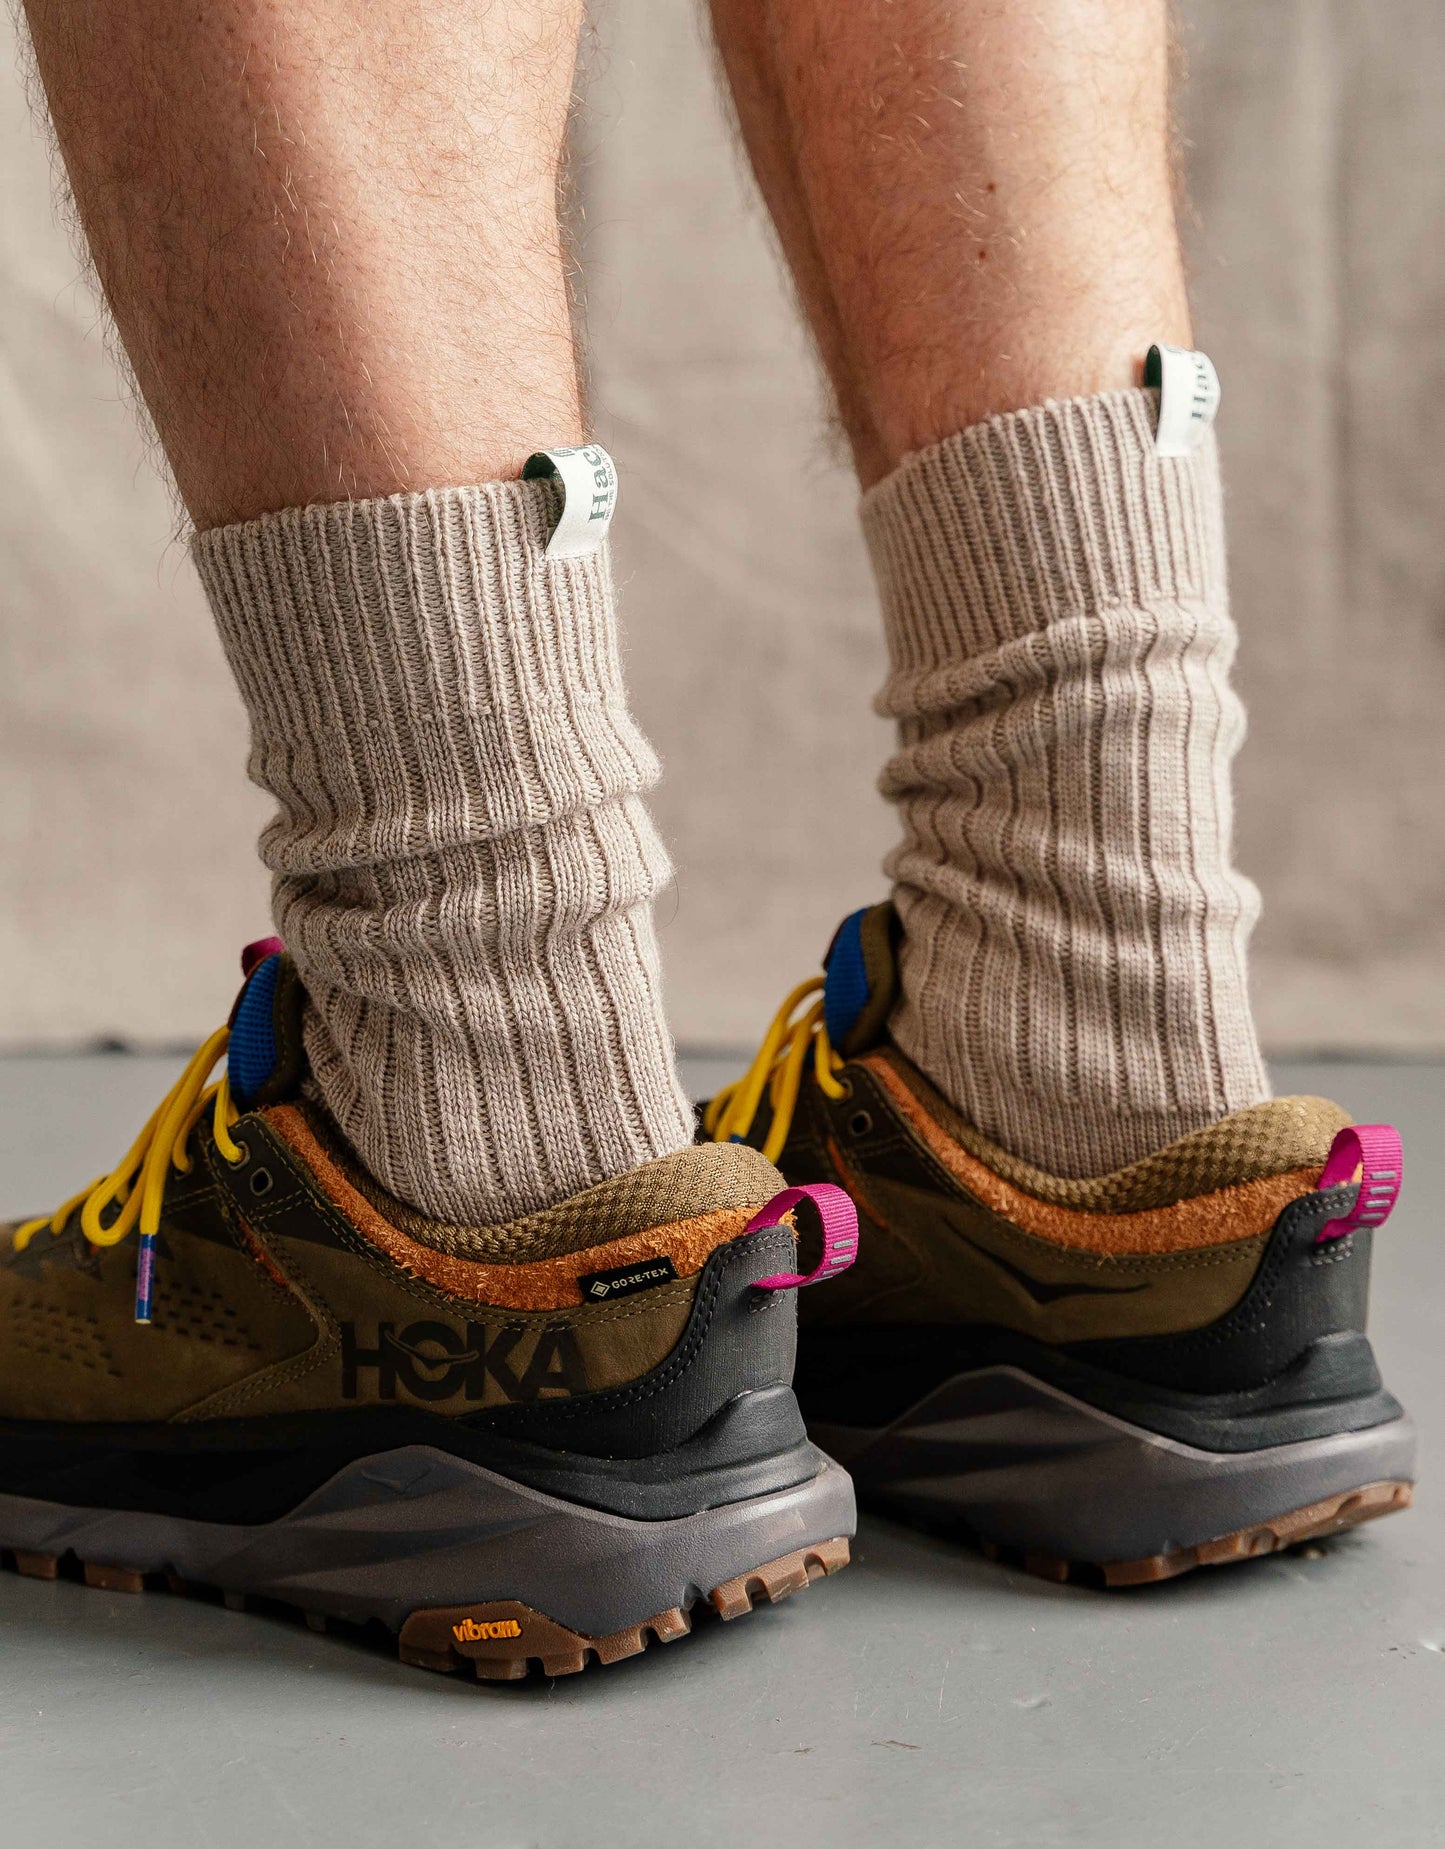 Hachure Hike and Trek wool socks worn with outdoor shoes